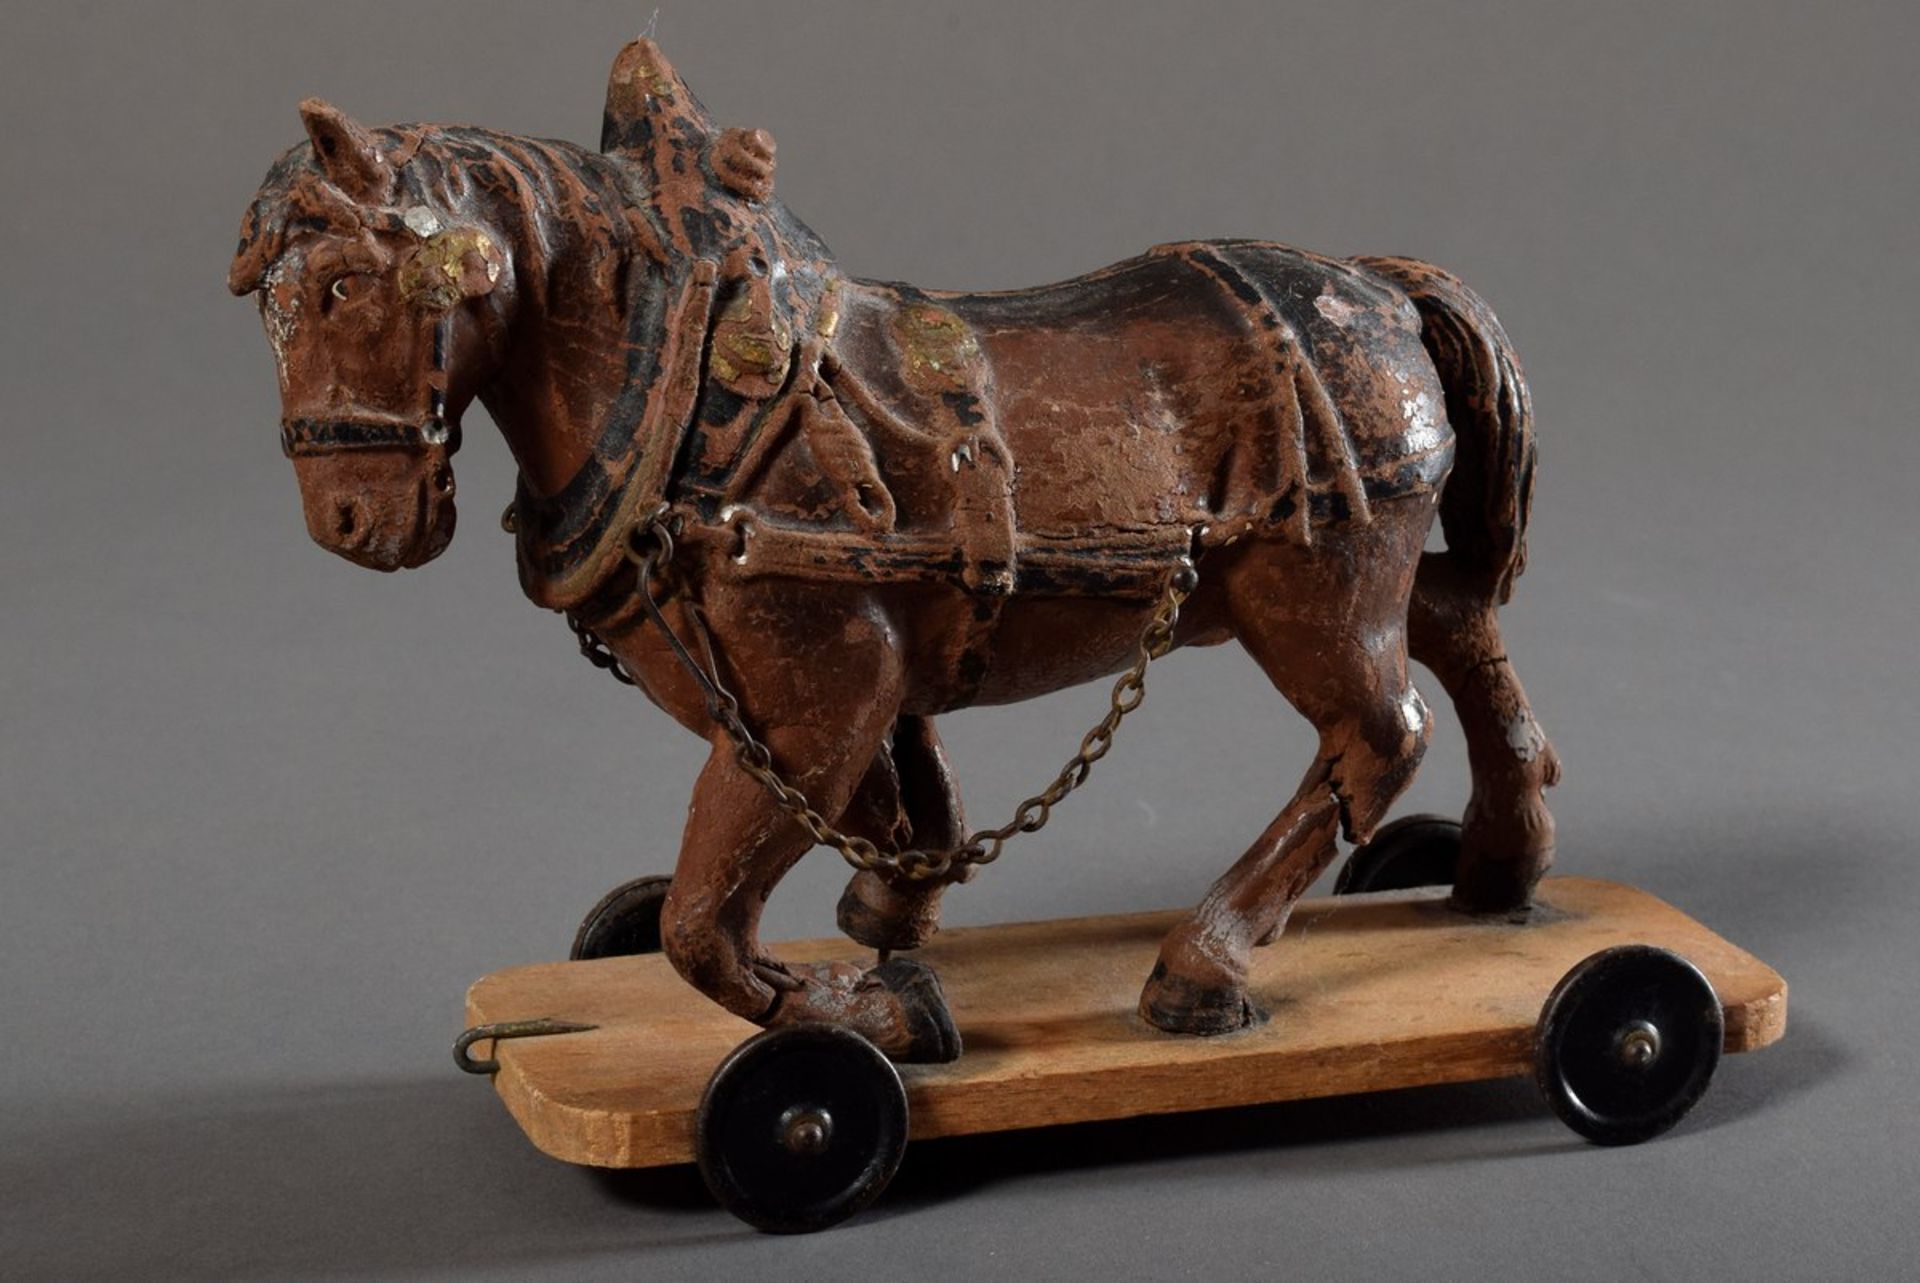 2 Parts old toys for children: "Carriage" and "Horse on wheels", wood with remains of old paint, 13 - Image 3 of 7